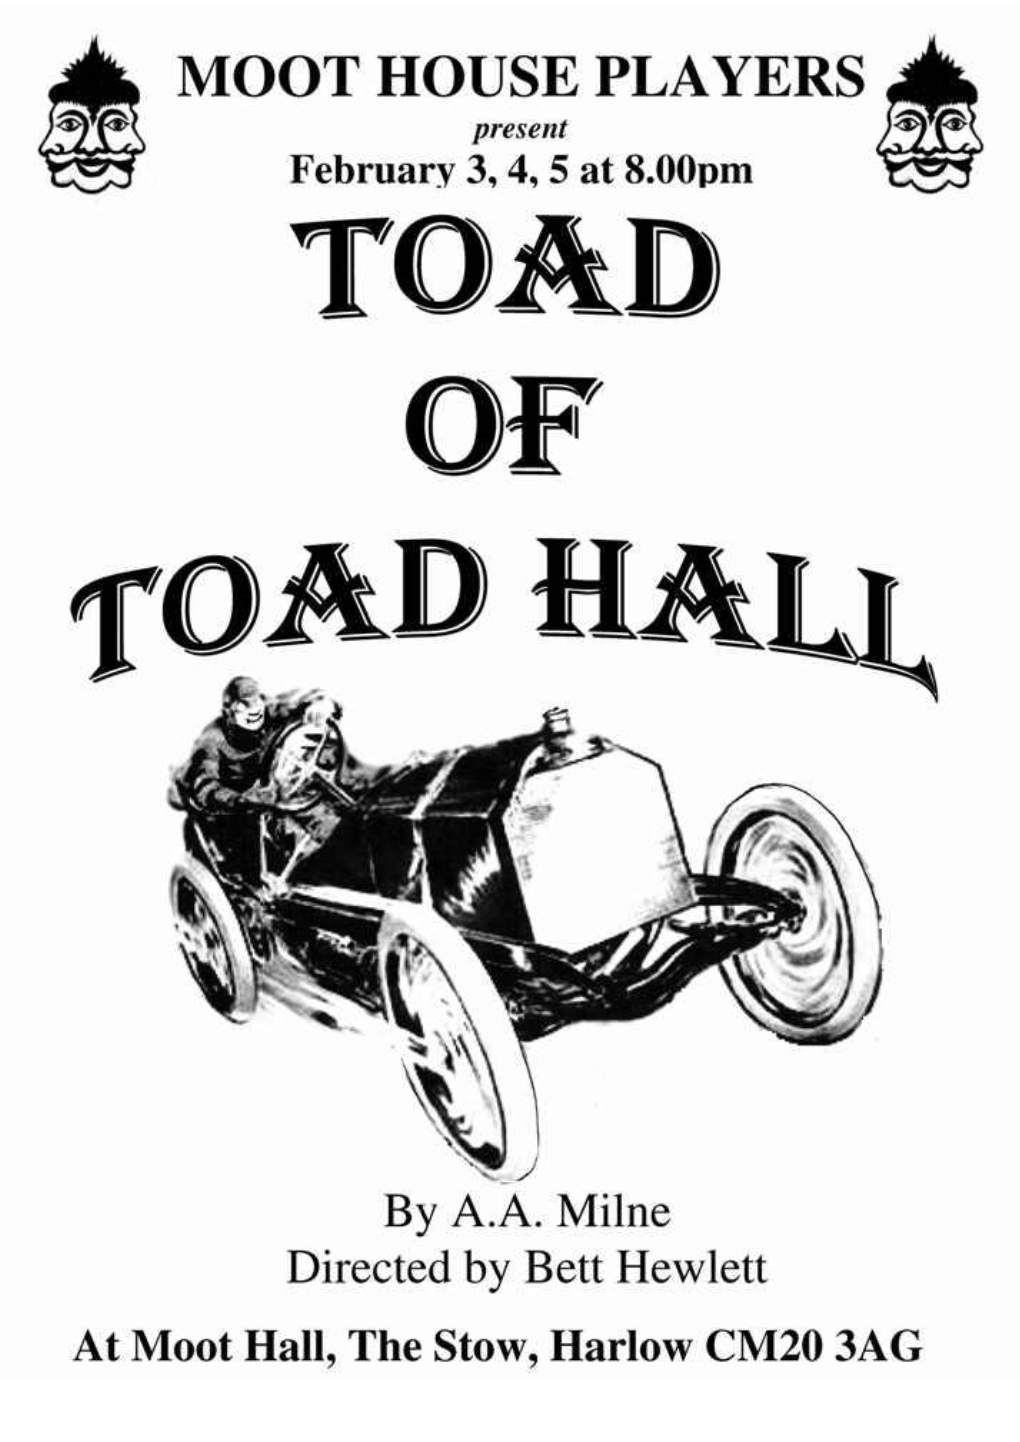 TOAD of TOAD HALL by A